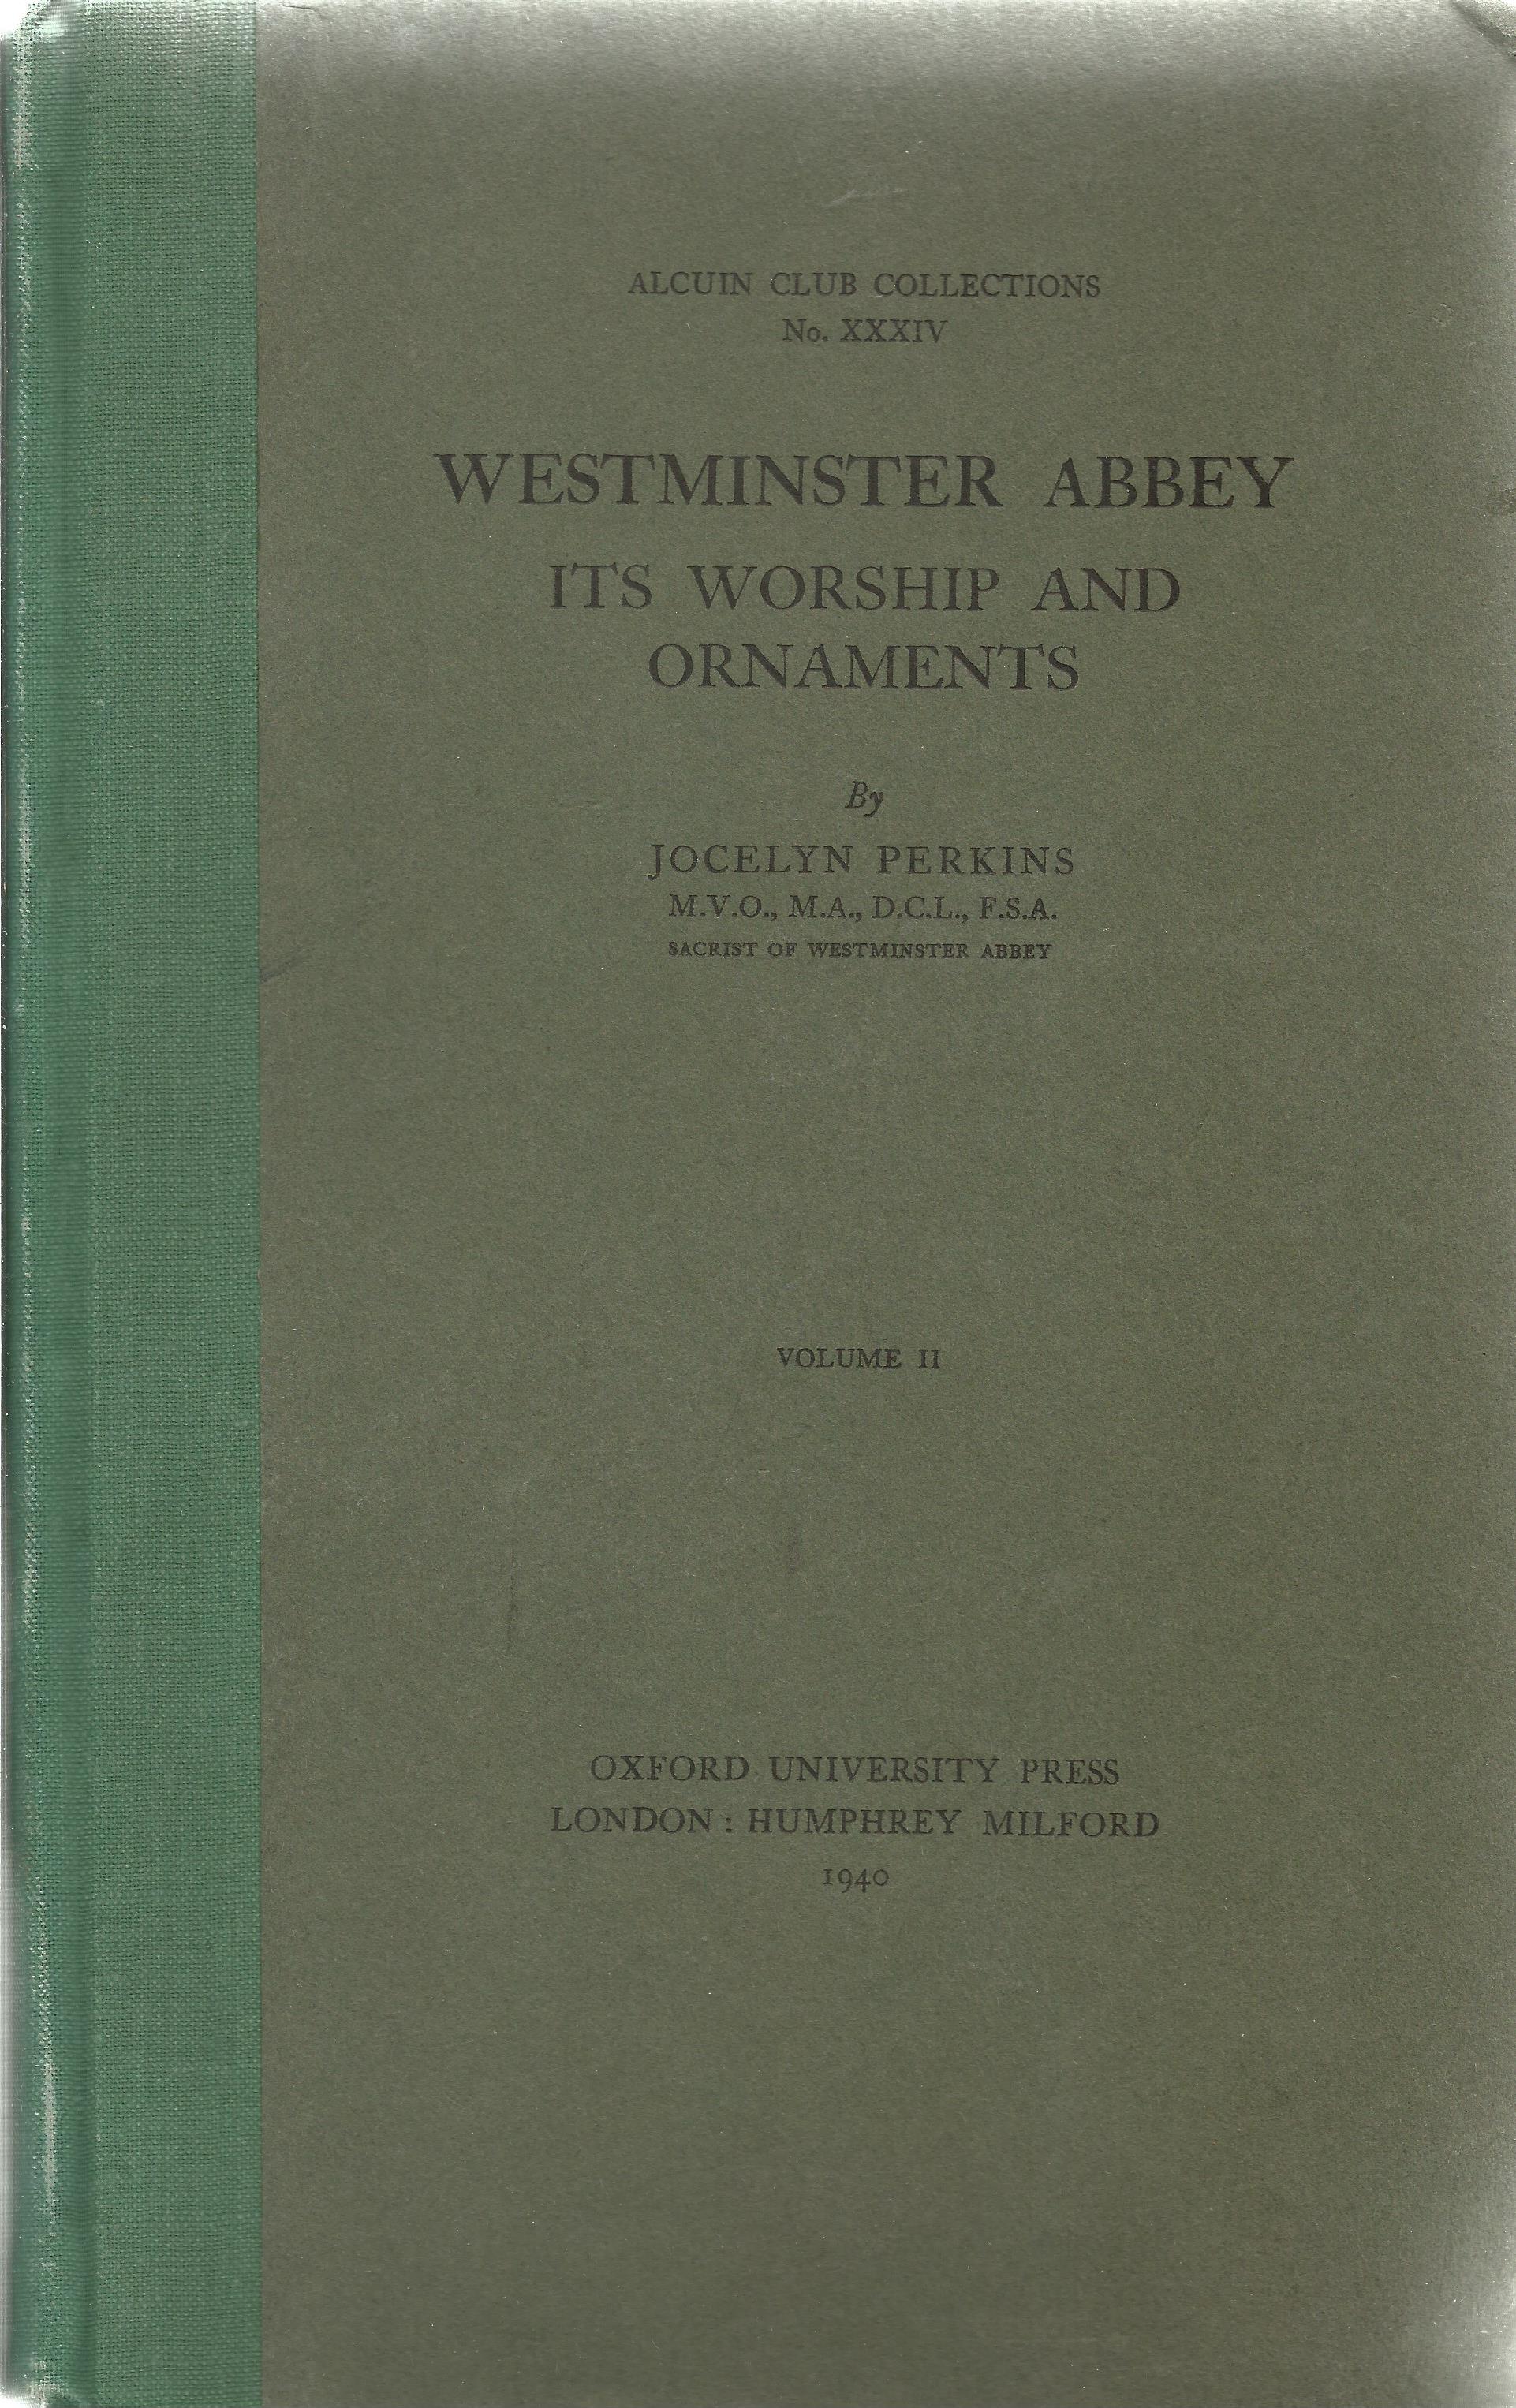 Westminster Abbey Its Worship and Ornaments by Jocelyn Perkins Vol II Hardback Book 1940 First